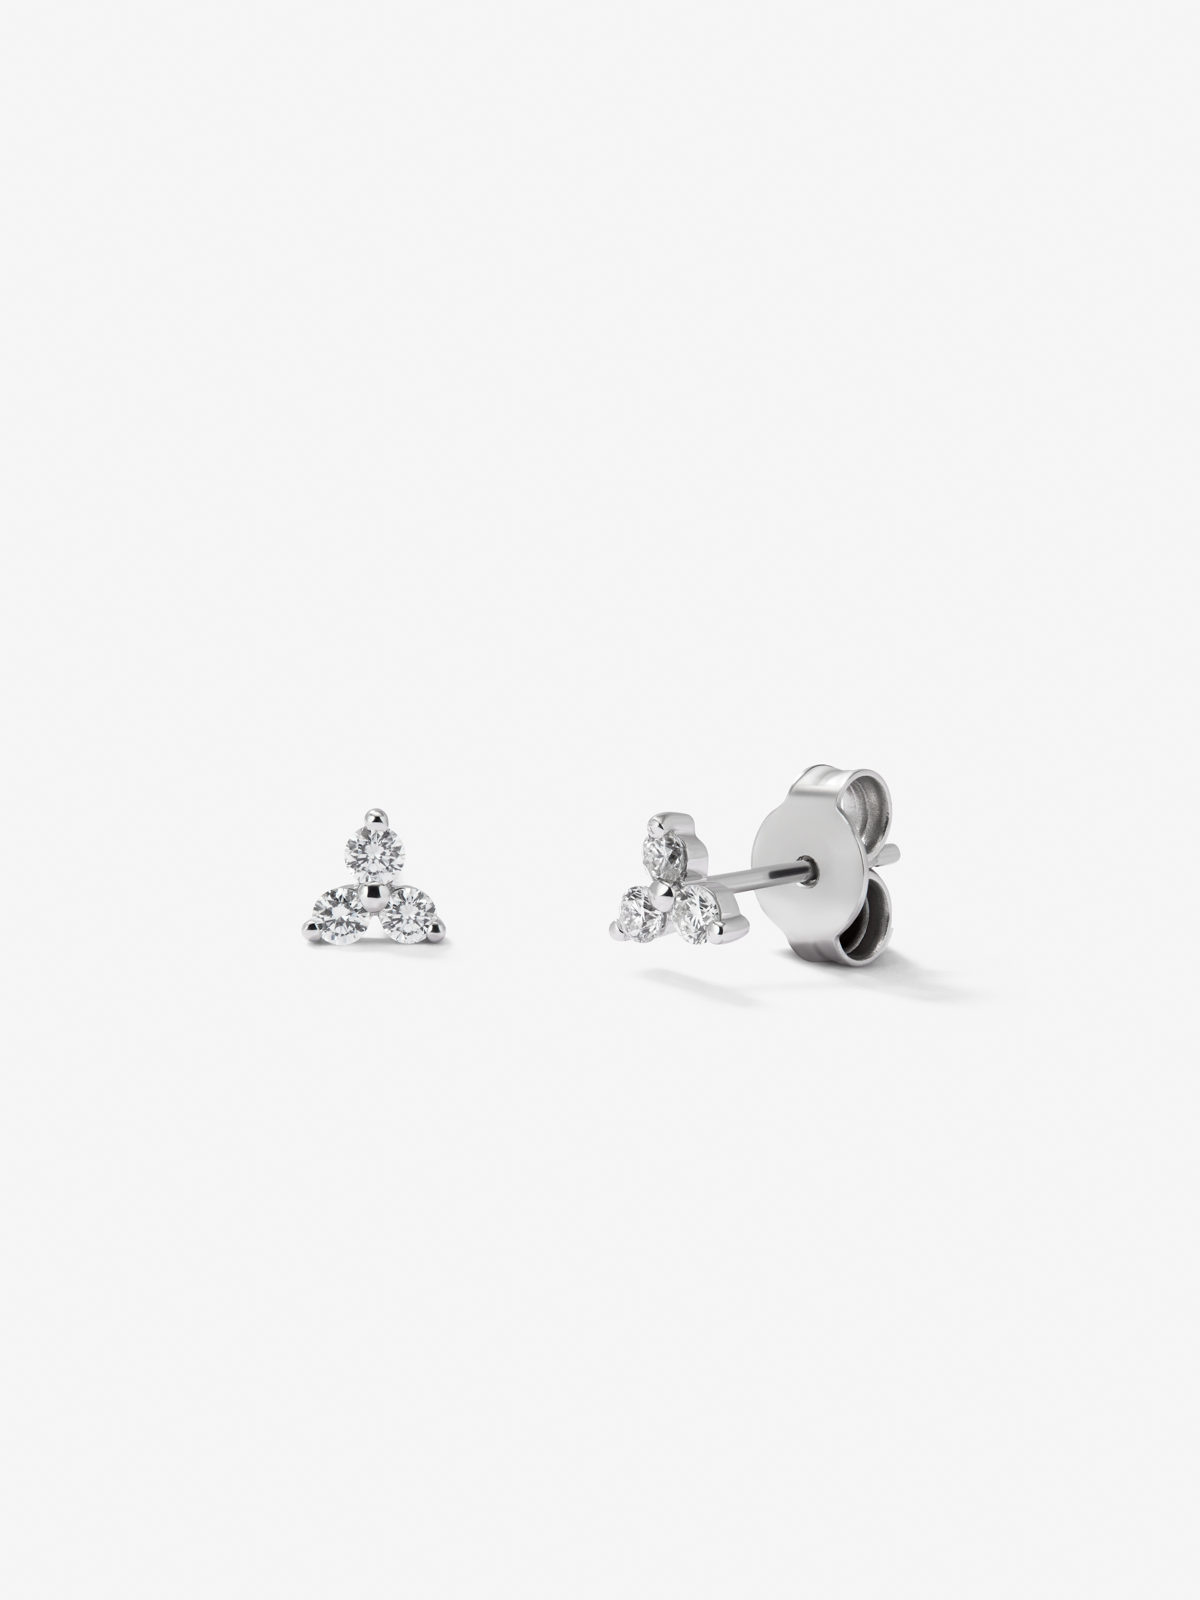 18K white gold earrings with white diamonds of 0.18 cts